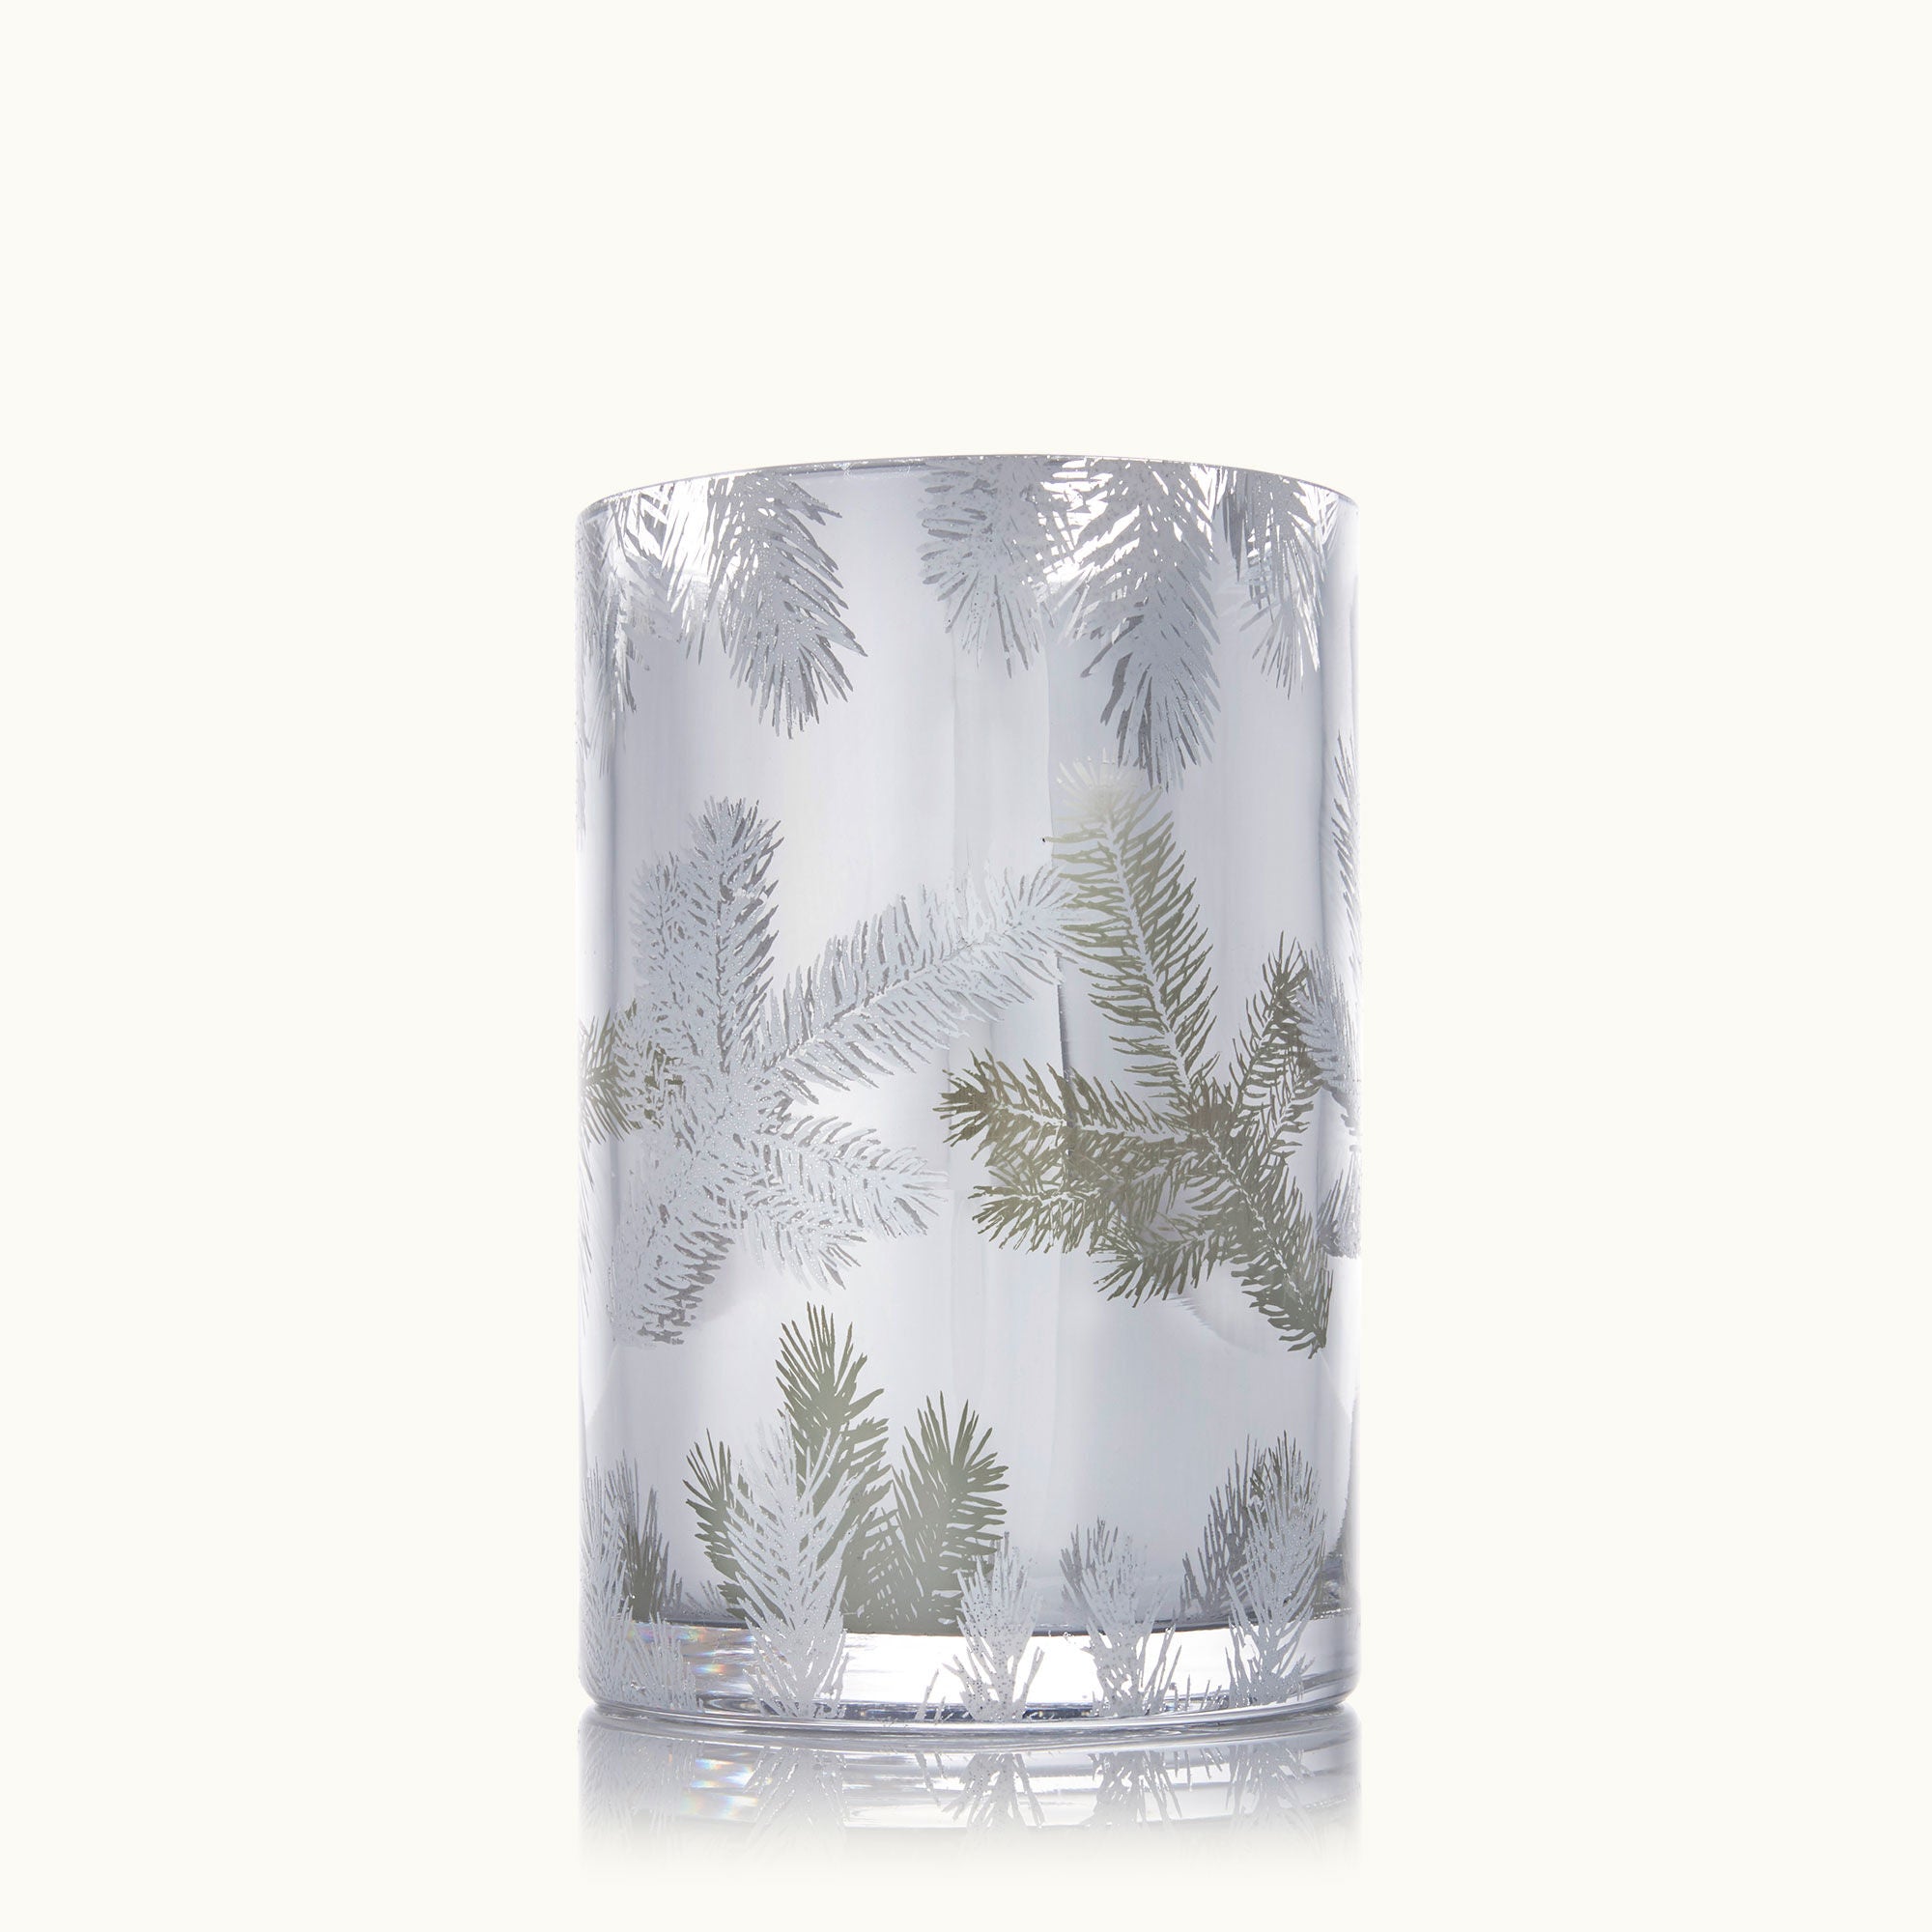 Frasier Fir Statement Candle - Boxed